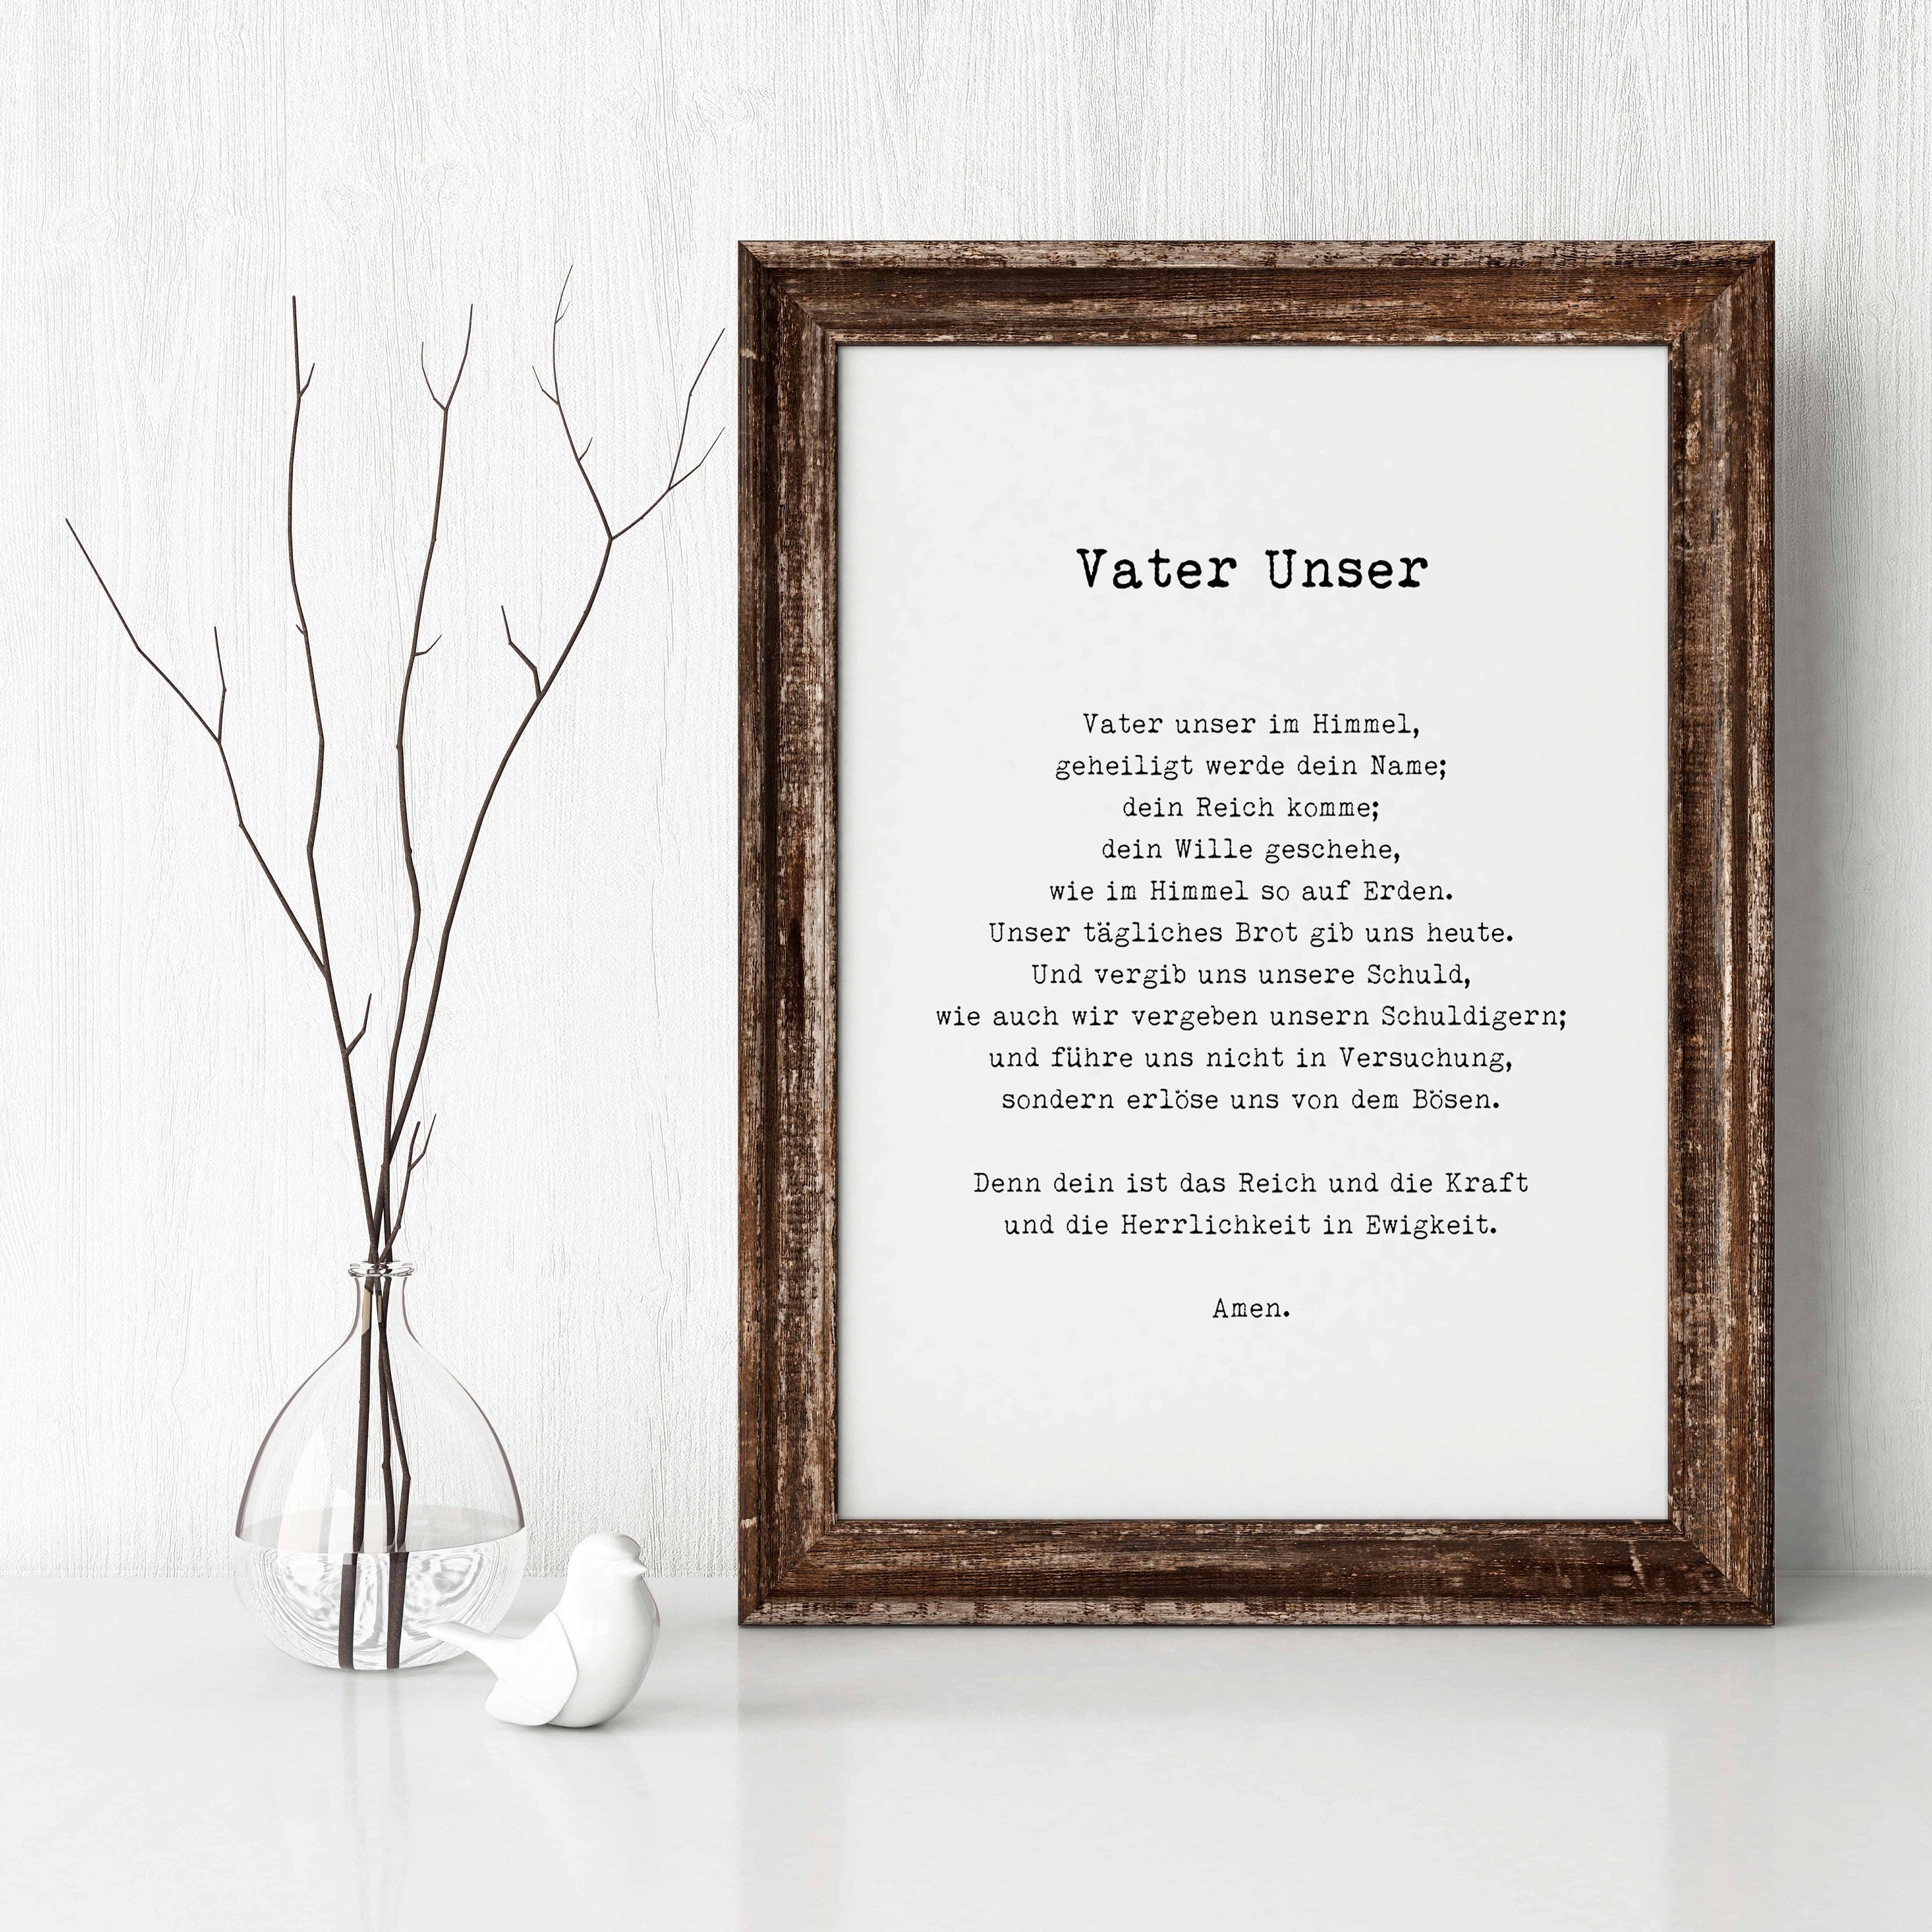 German LORD's Prayer Unframed and Framed Quote Print in Vintage Style, Vater Unser Our Father Prayer Christian Wall Art Inspirational Quote